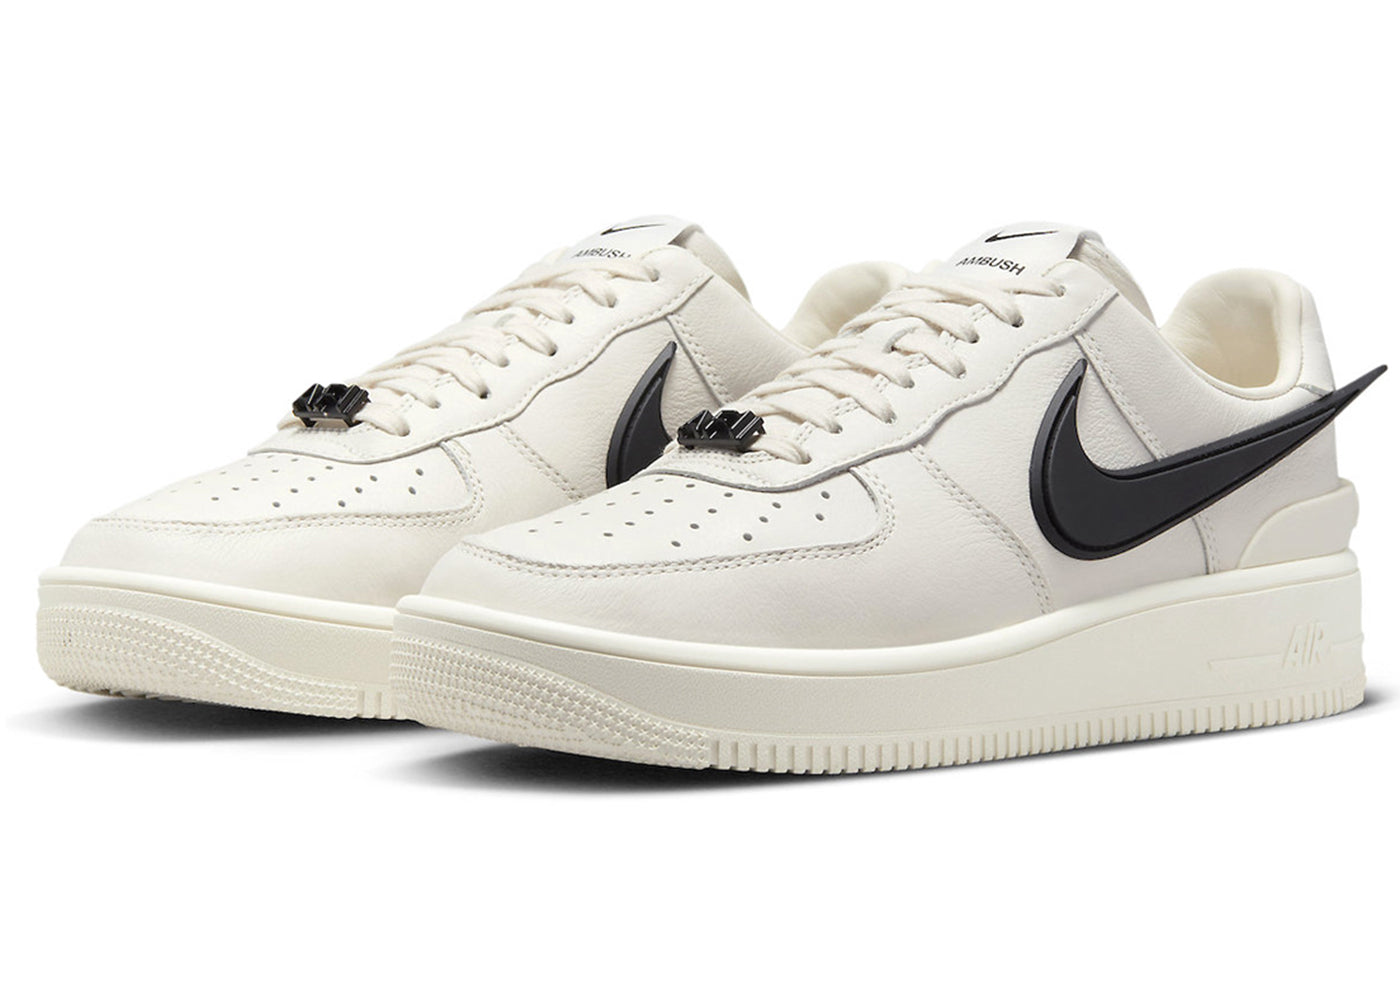 Nike Air Force 1 LV8 KSA Worldwide Pack White Reflect Silver (TD) Toddler -  CT4682-100 - US